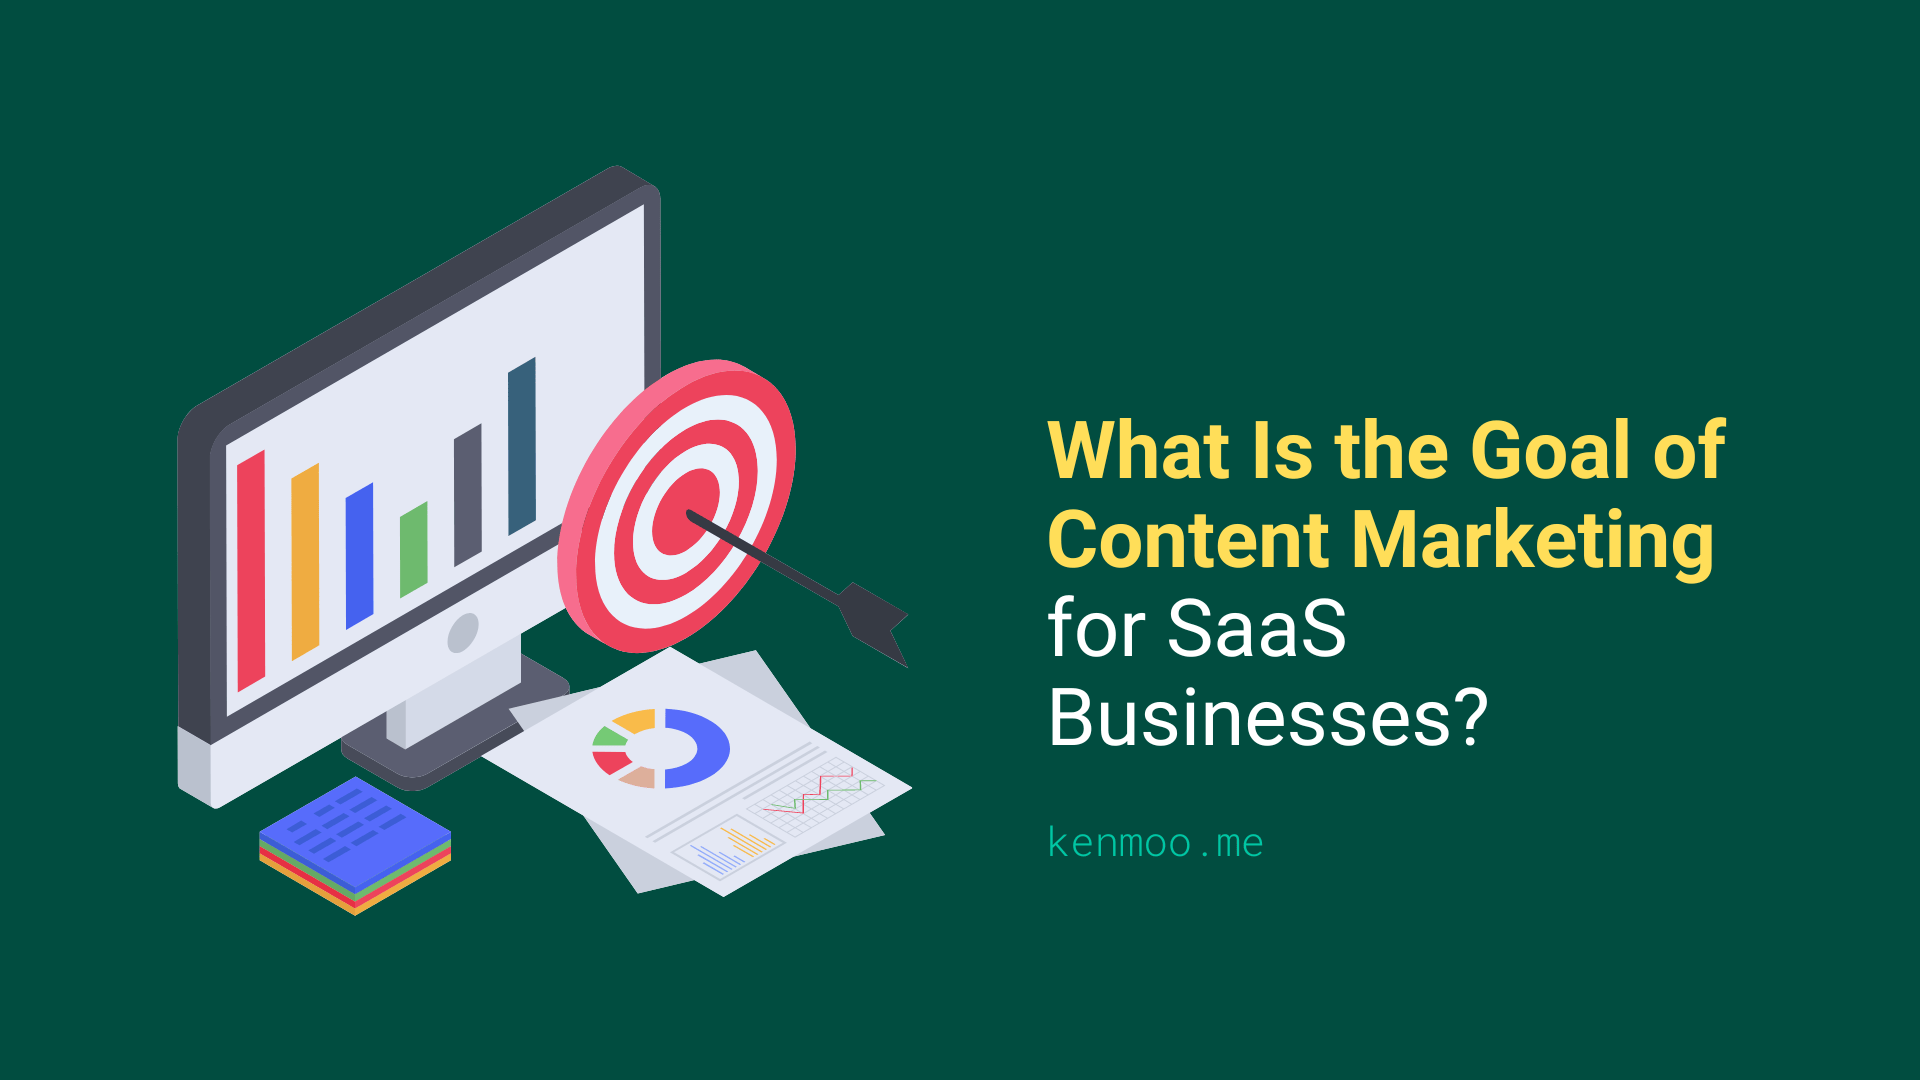 What Is the Goal of Content Marketing for SaaS Businesses